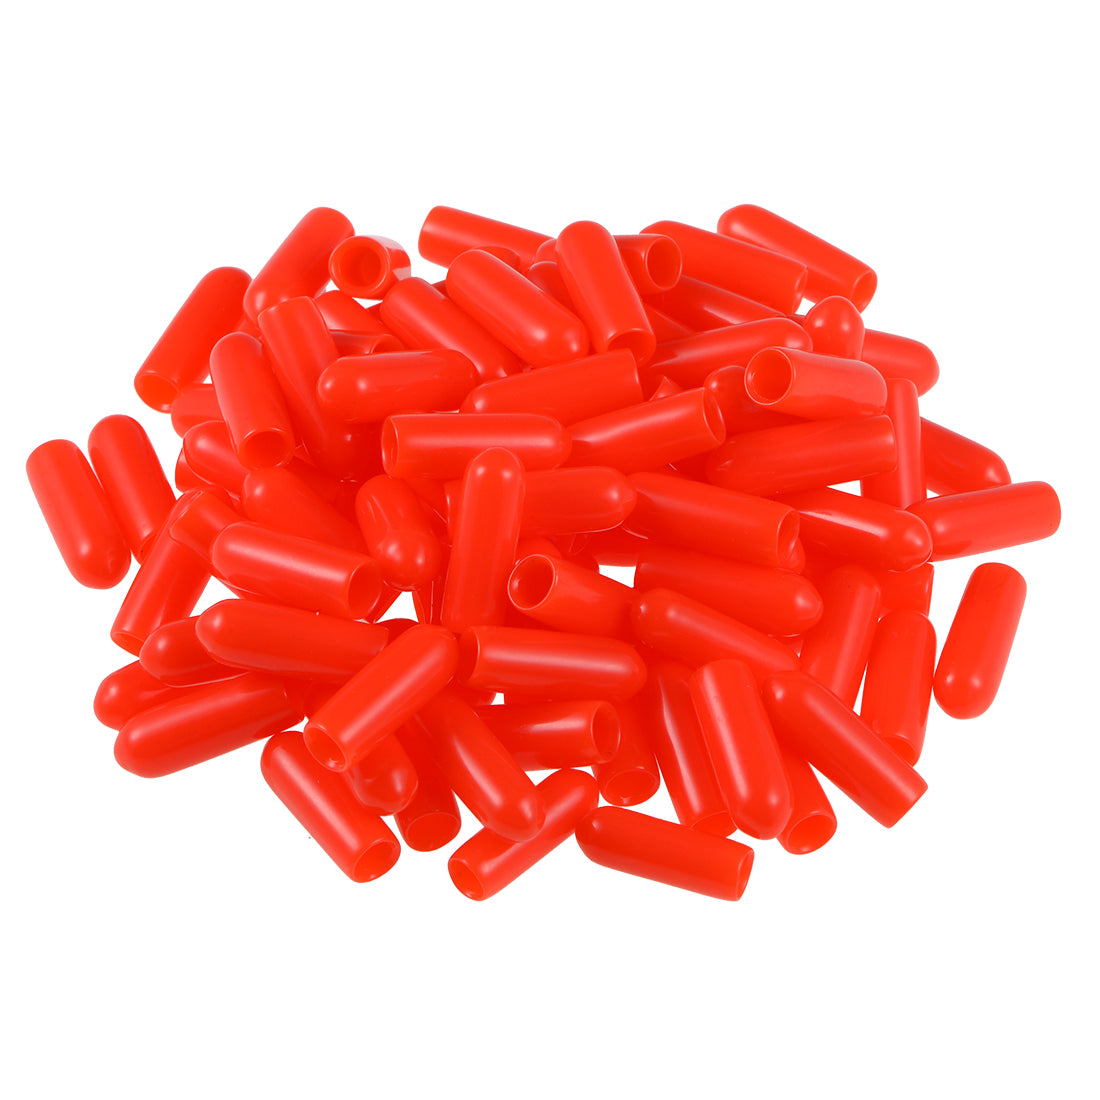 uxcell Uxcell 200pcs Rubber End Caps 3.5mm ID 15mm Height Screw Thread Protectors Red